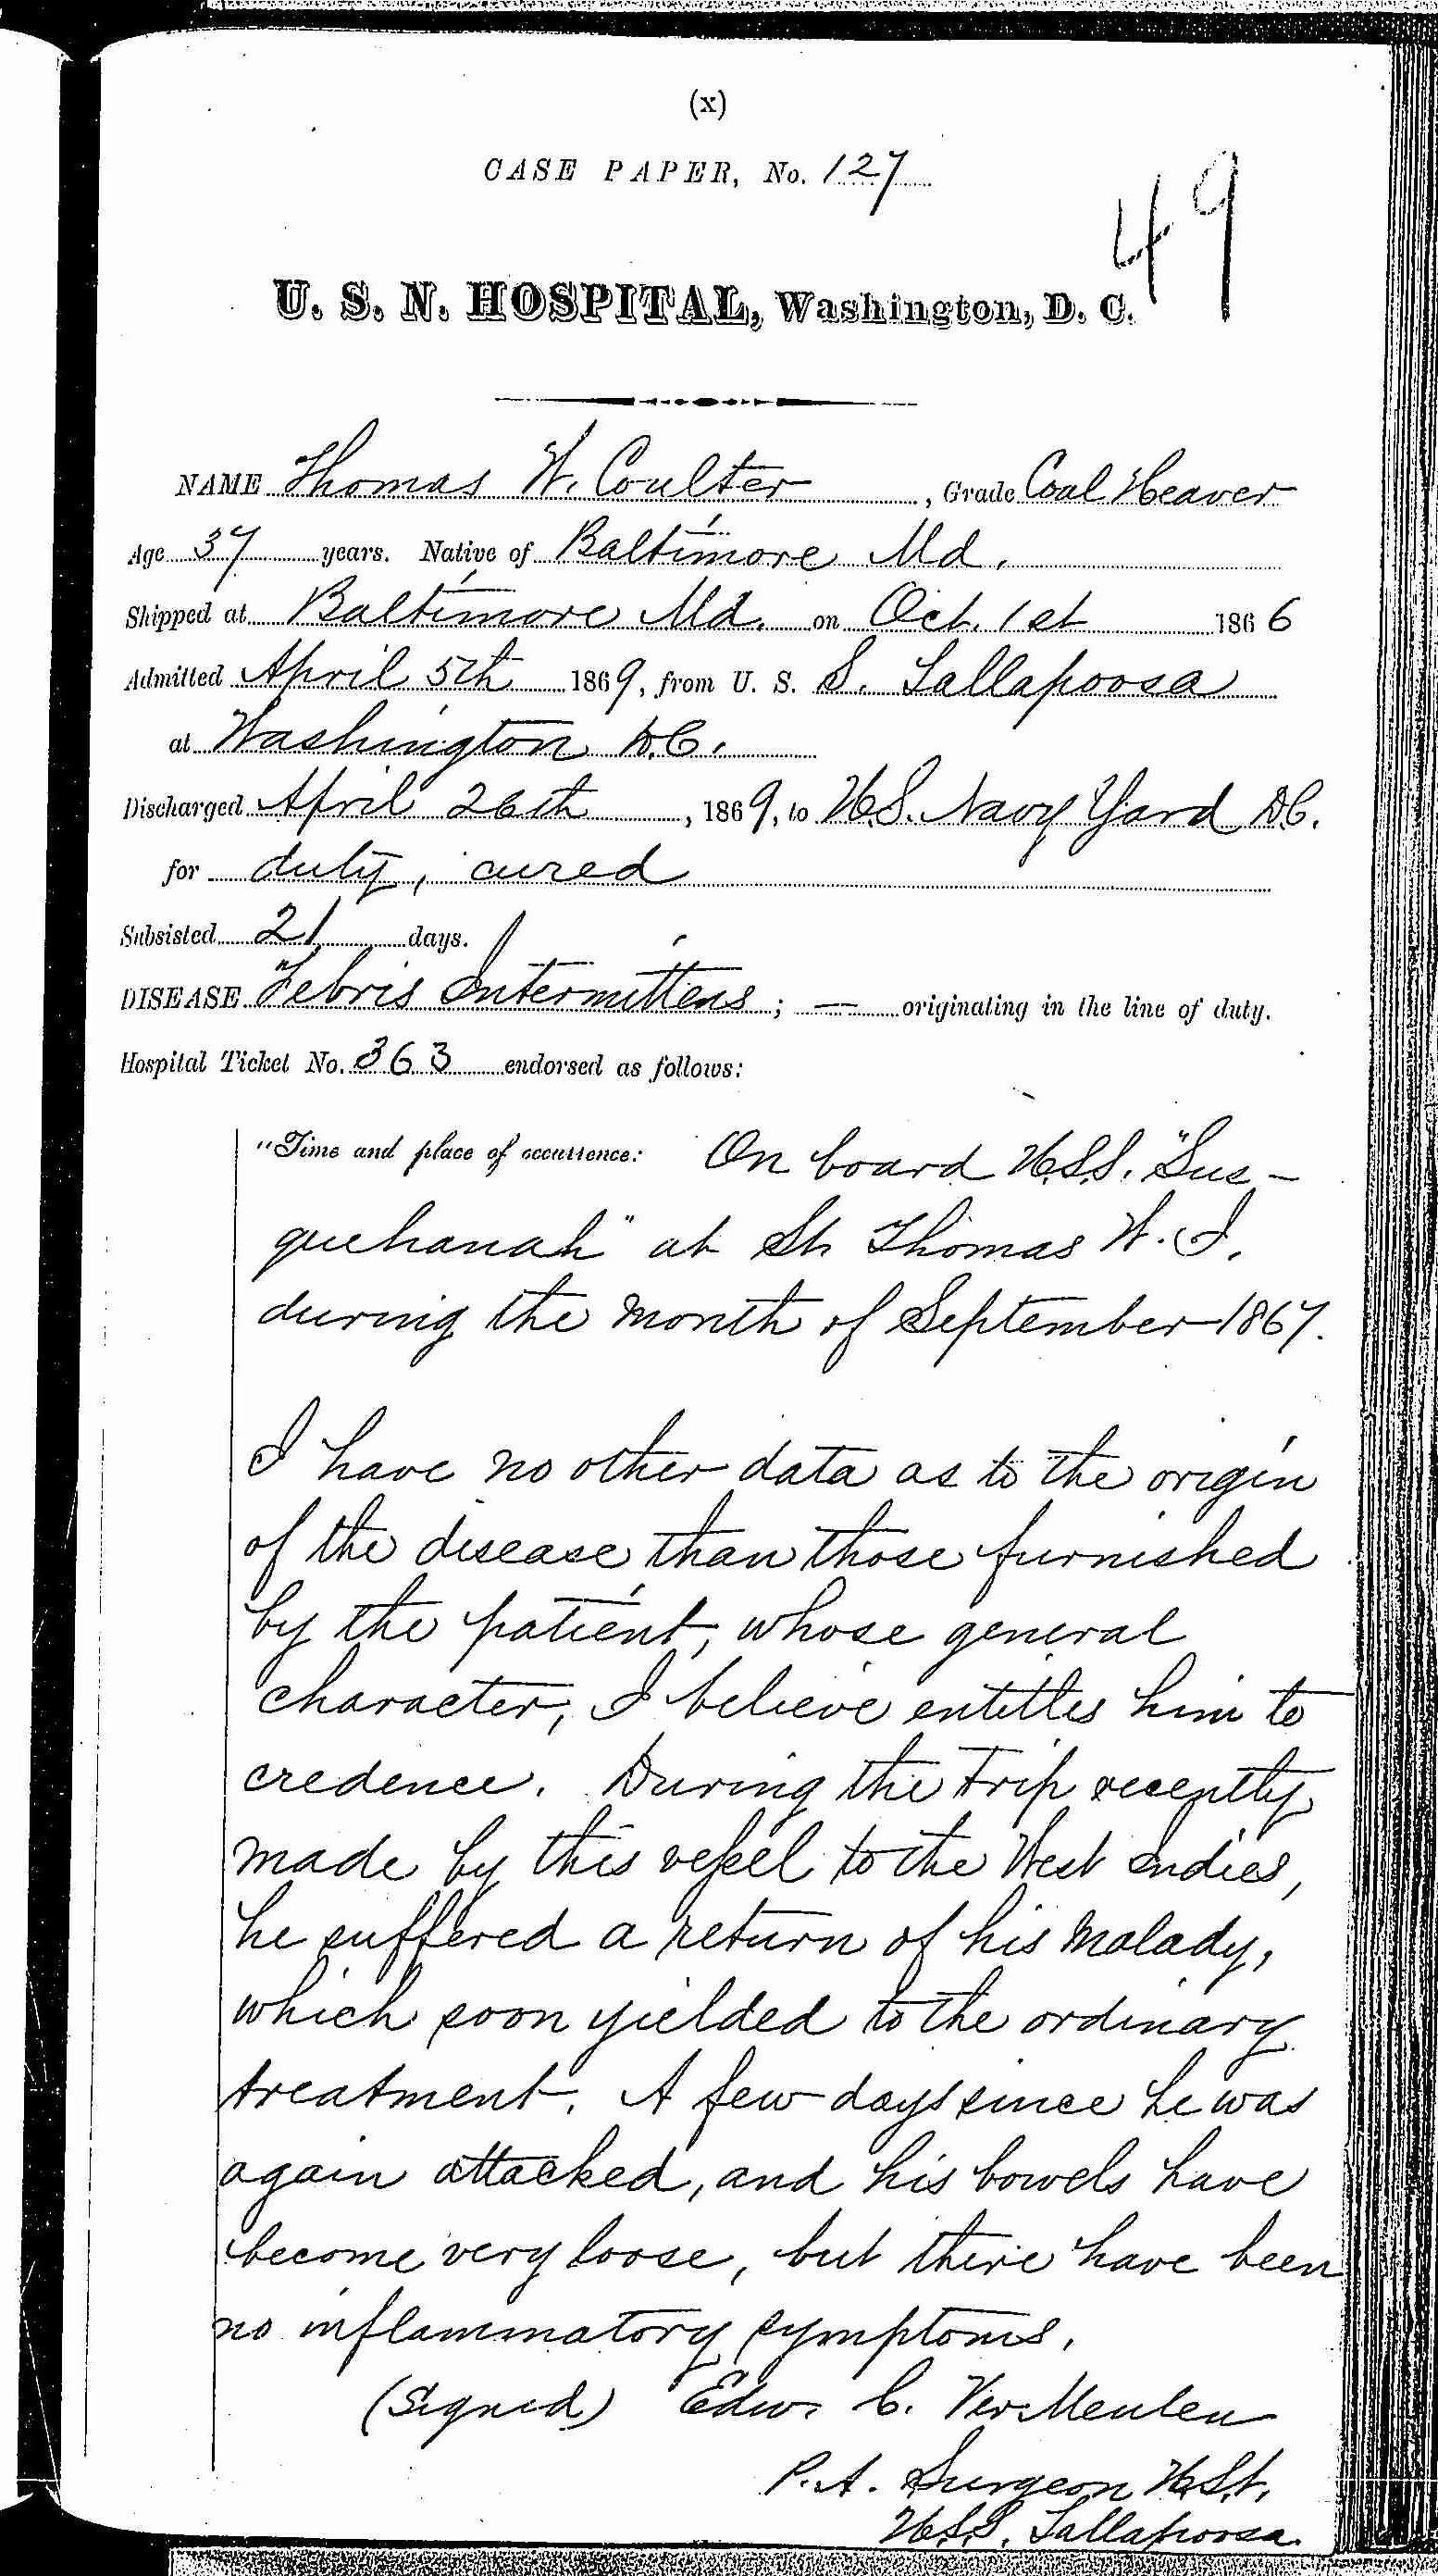 Entry for Thomas W. Coulter (page 1 of 3) in the log Hospital Tickets and Case Papers - Naval Hospital - Washington, D.C. - 1868-69